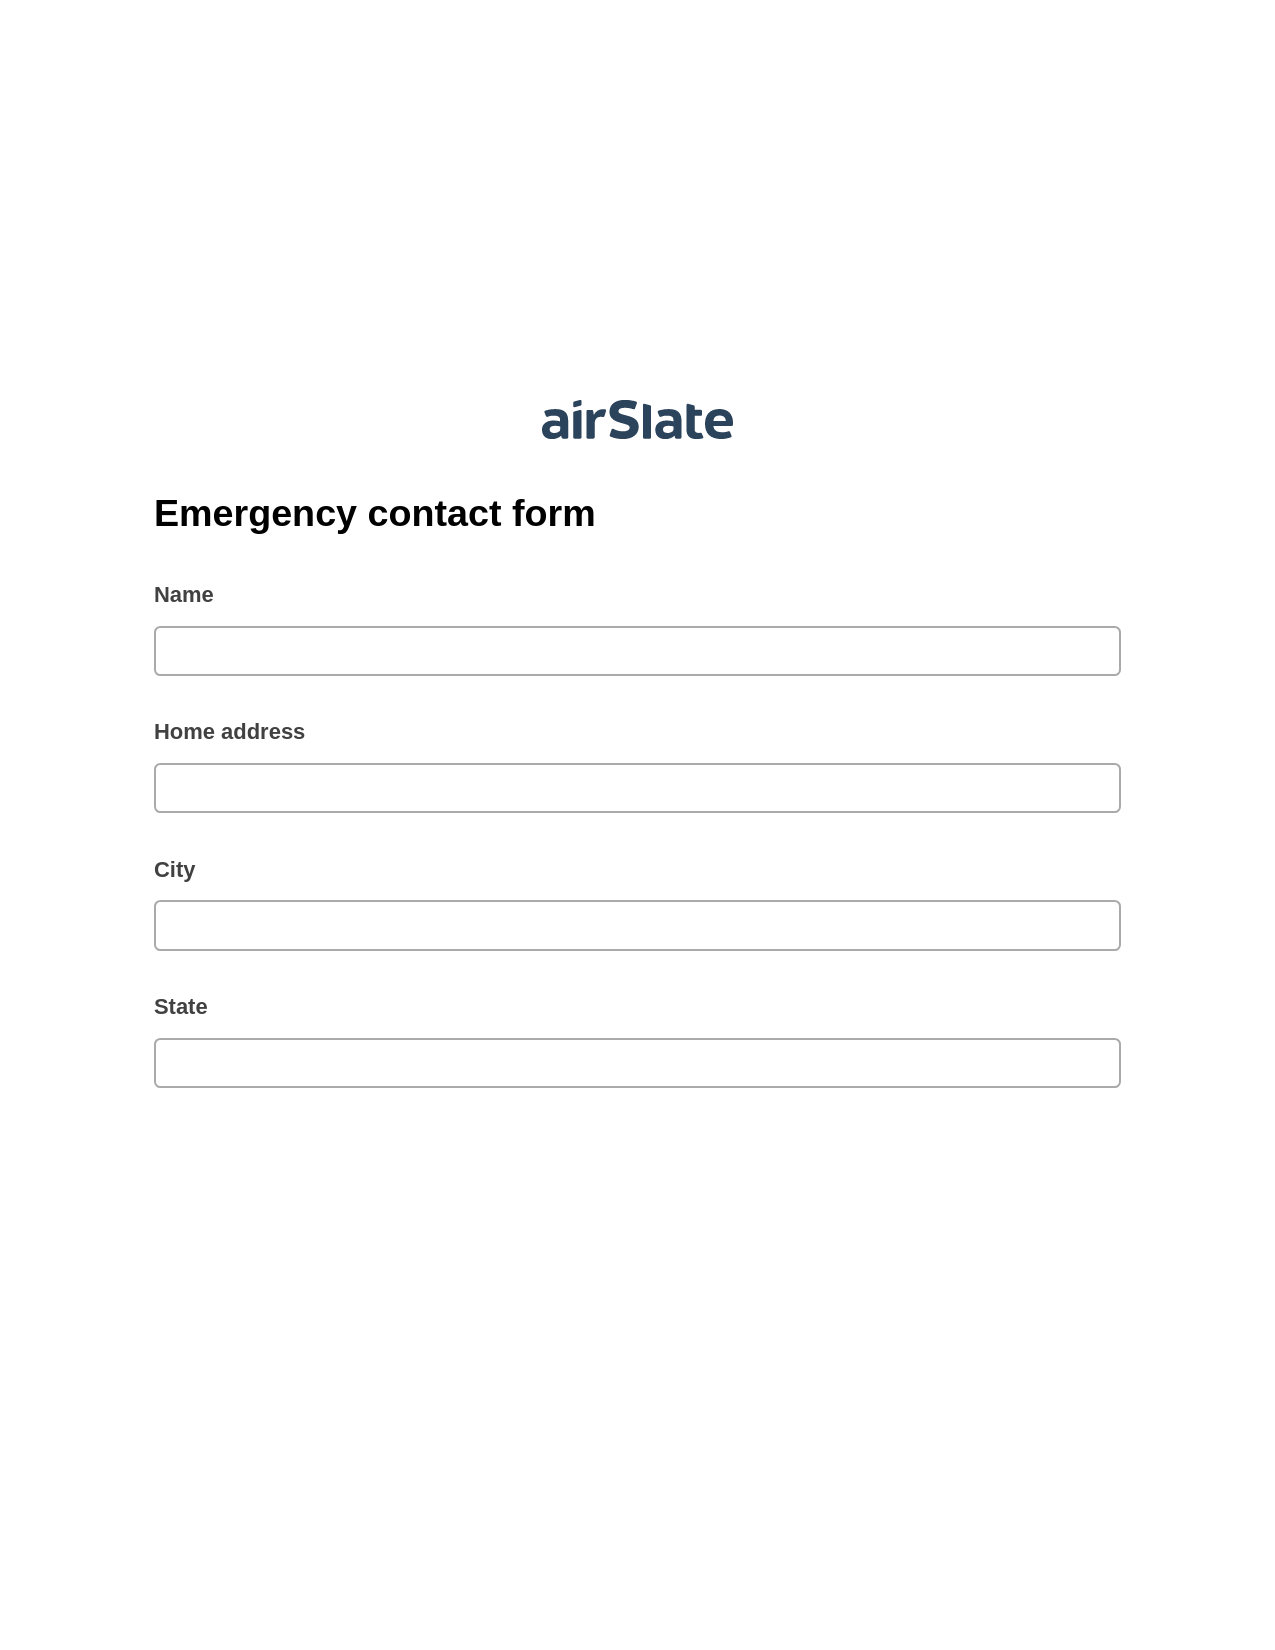 Emergency contact form Pre-fill Dropdown from Airtable, Mailchimp send Campaign bot, Webhook Postfinish Bot